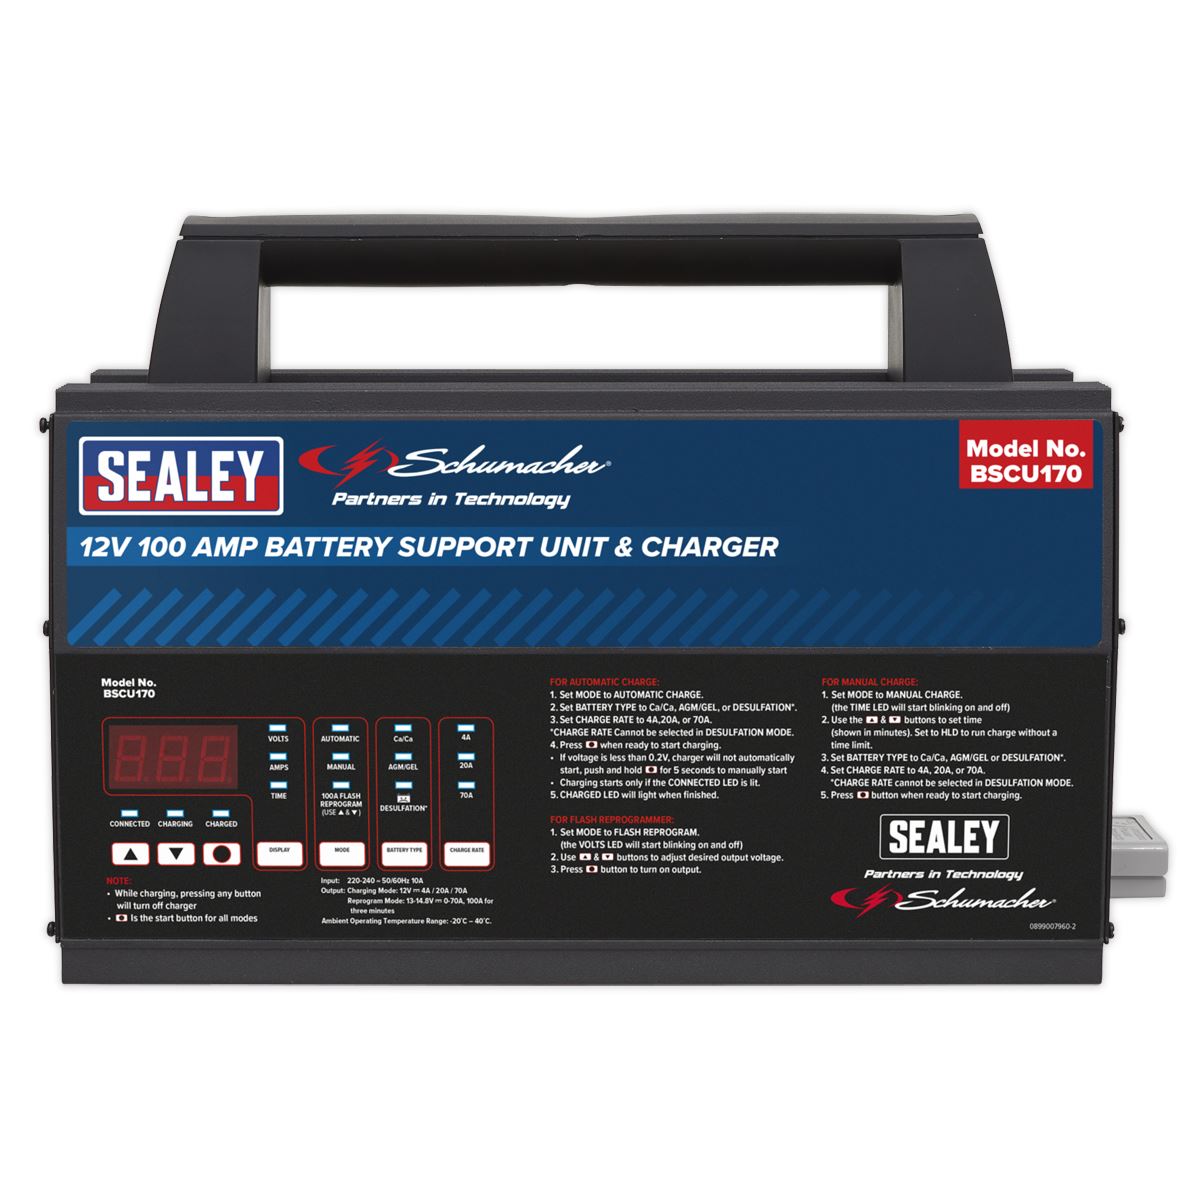 Sealey Schumacher Battery Support Unit & Charger - 12V 100A BSCU170